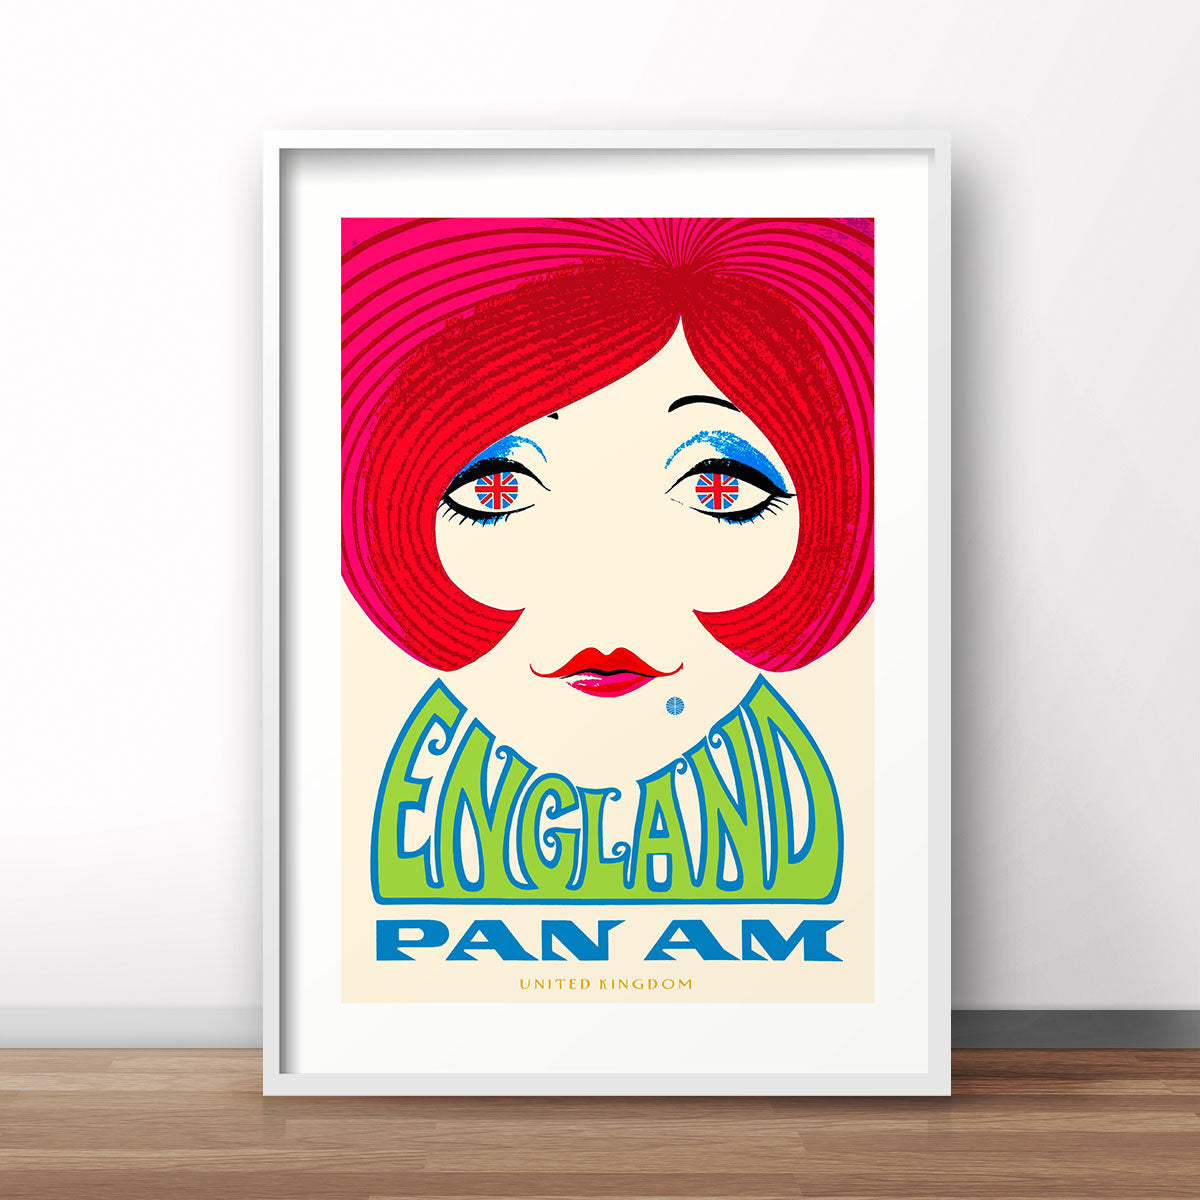 Pan Am England retro vintage travel poster print from Places We Luv